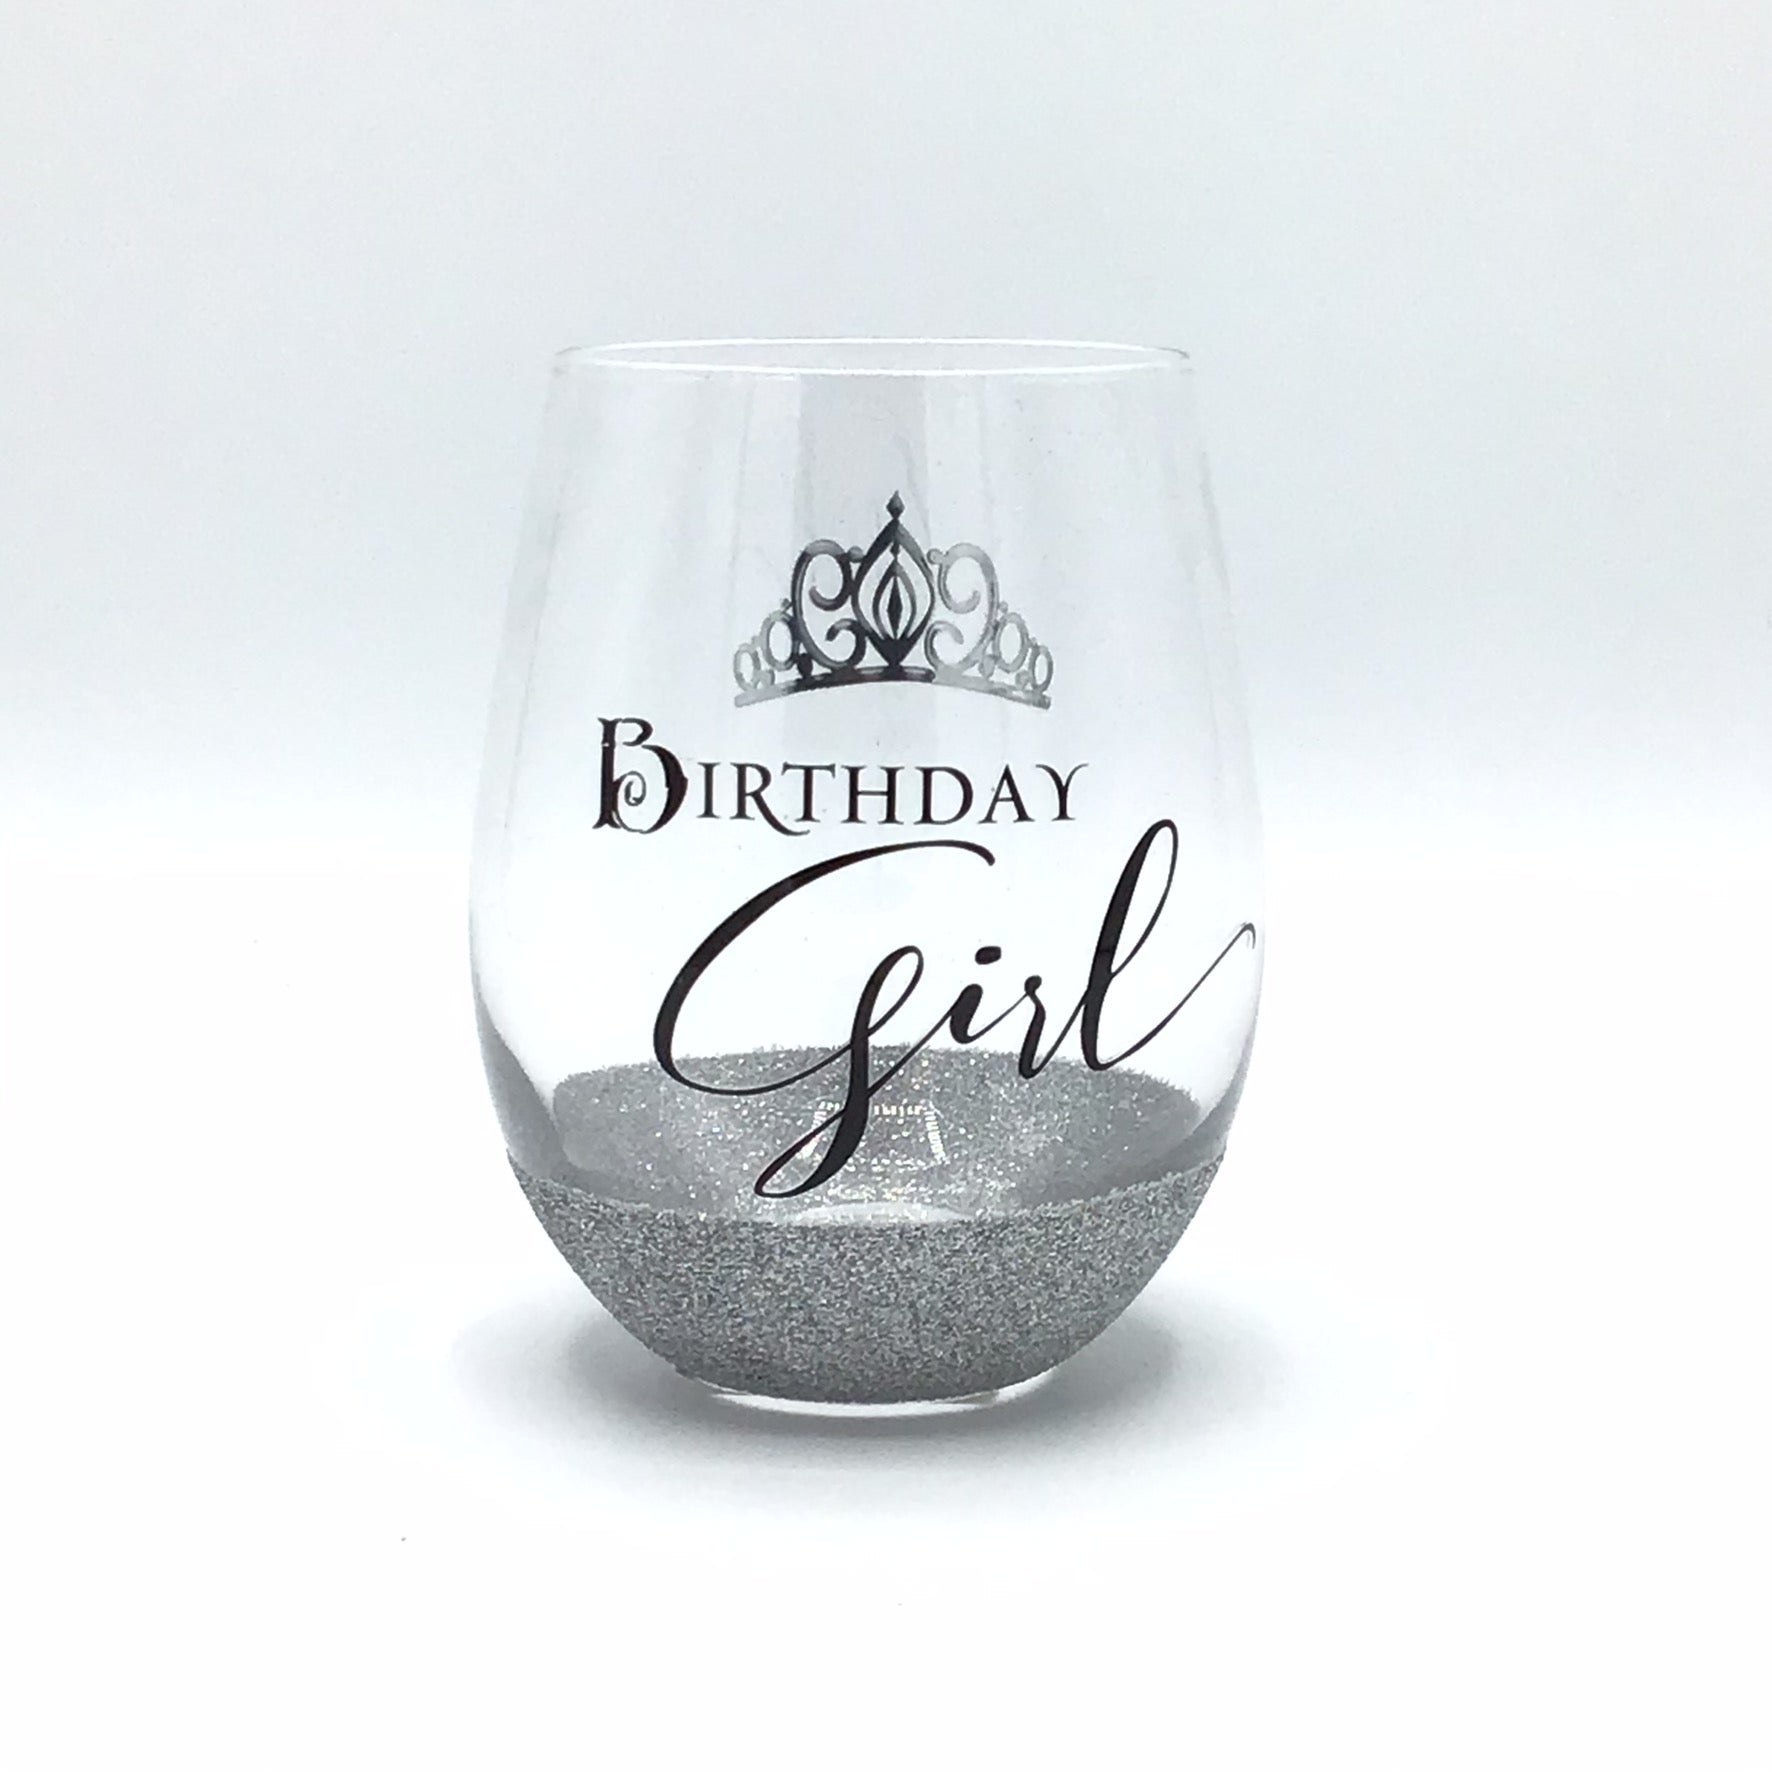 Glitter Wine Glasses – The Pink Pearl Gift Shop